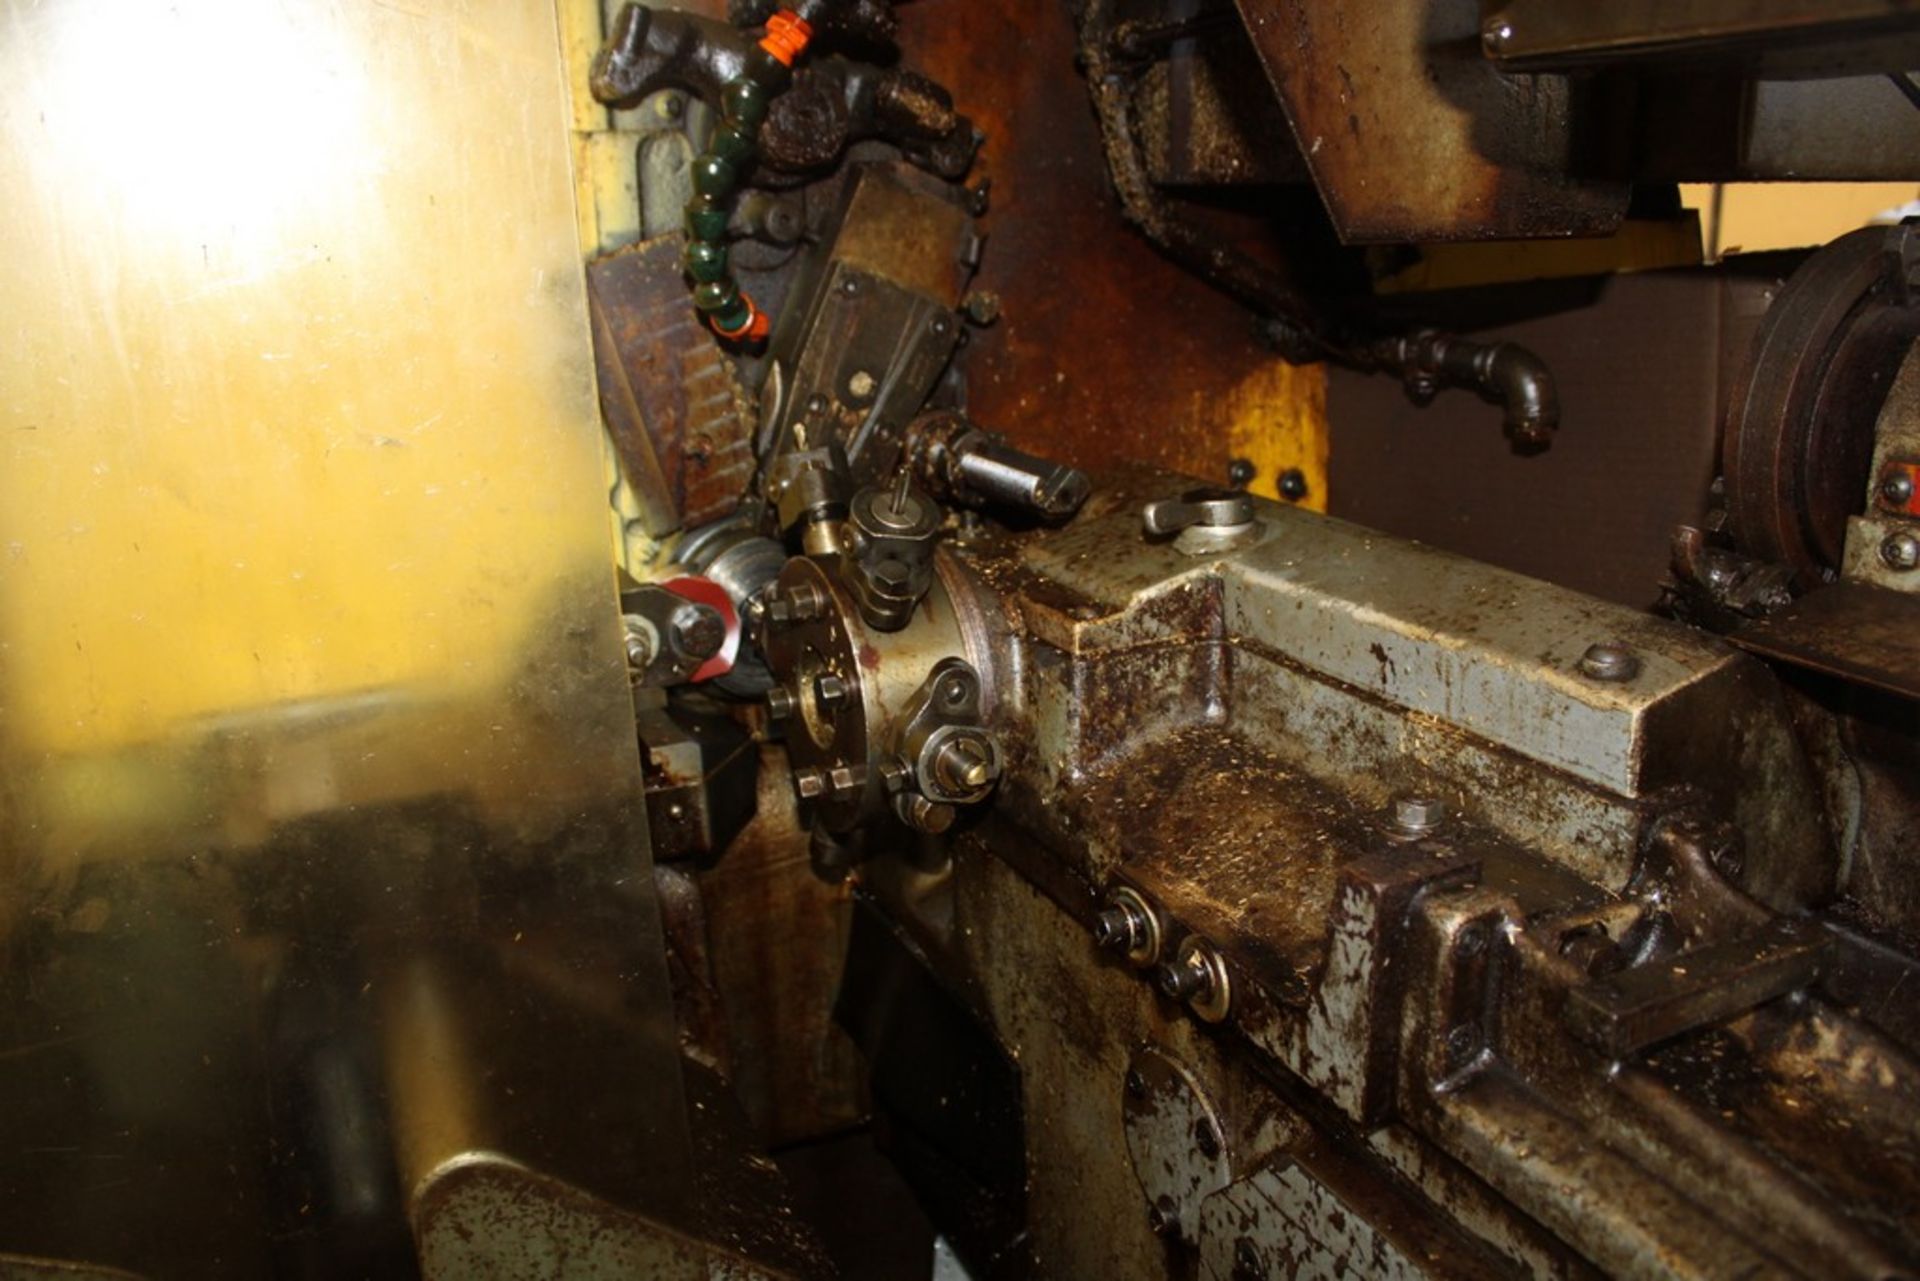 BROWN & SHARPE NO. 2 1-5/8" 4-SPEED AUTOMATIC SCREW MACHINE, S/N 542-2-6217, WITH VERTICAL SLIDE - Image 2 of 6